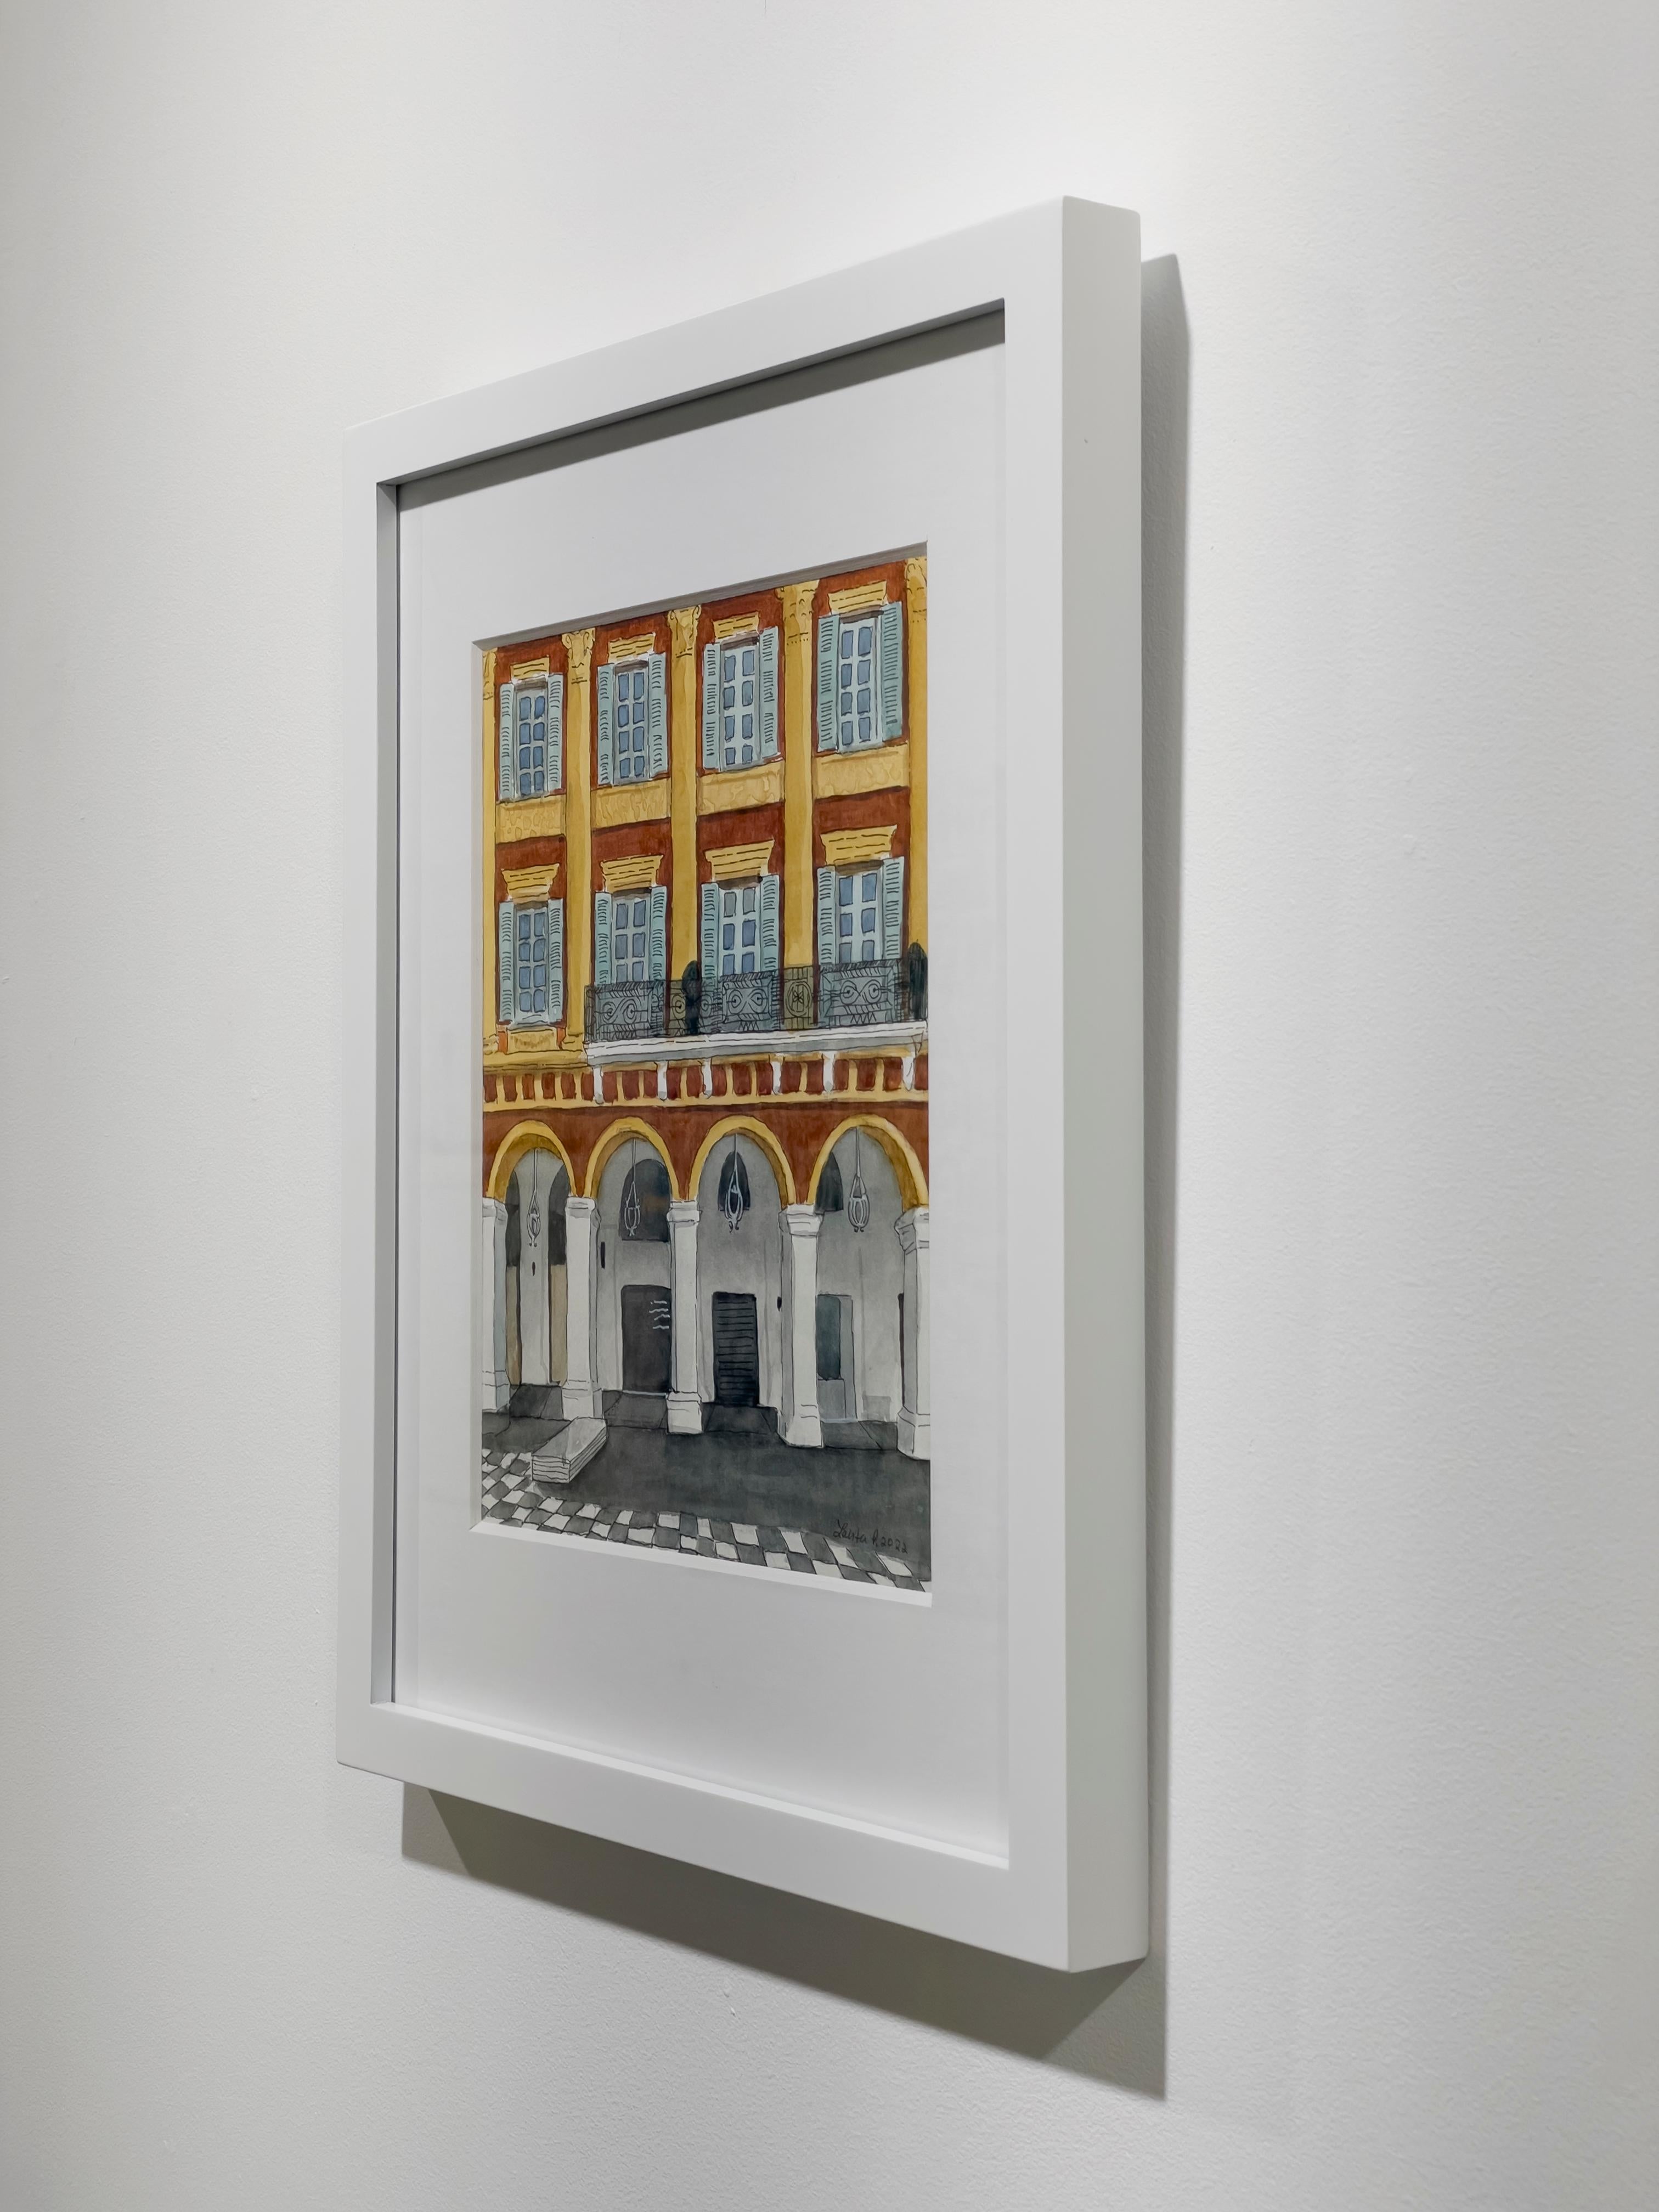 This original architectural illustration by Laerta Premto is made with watercolor and ink on paper. It captures a building structure with warm orange and yellow hues, inspired by the artist's time in Nice, France. The painting itself is 10